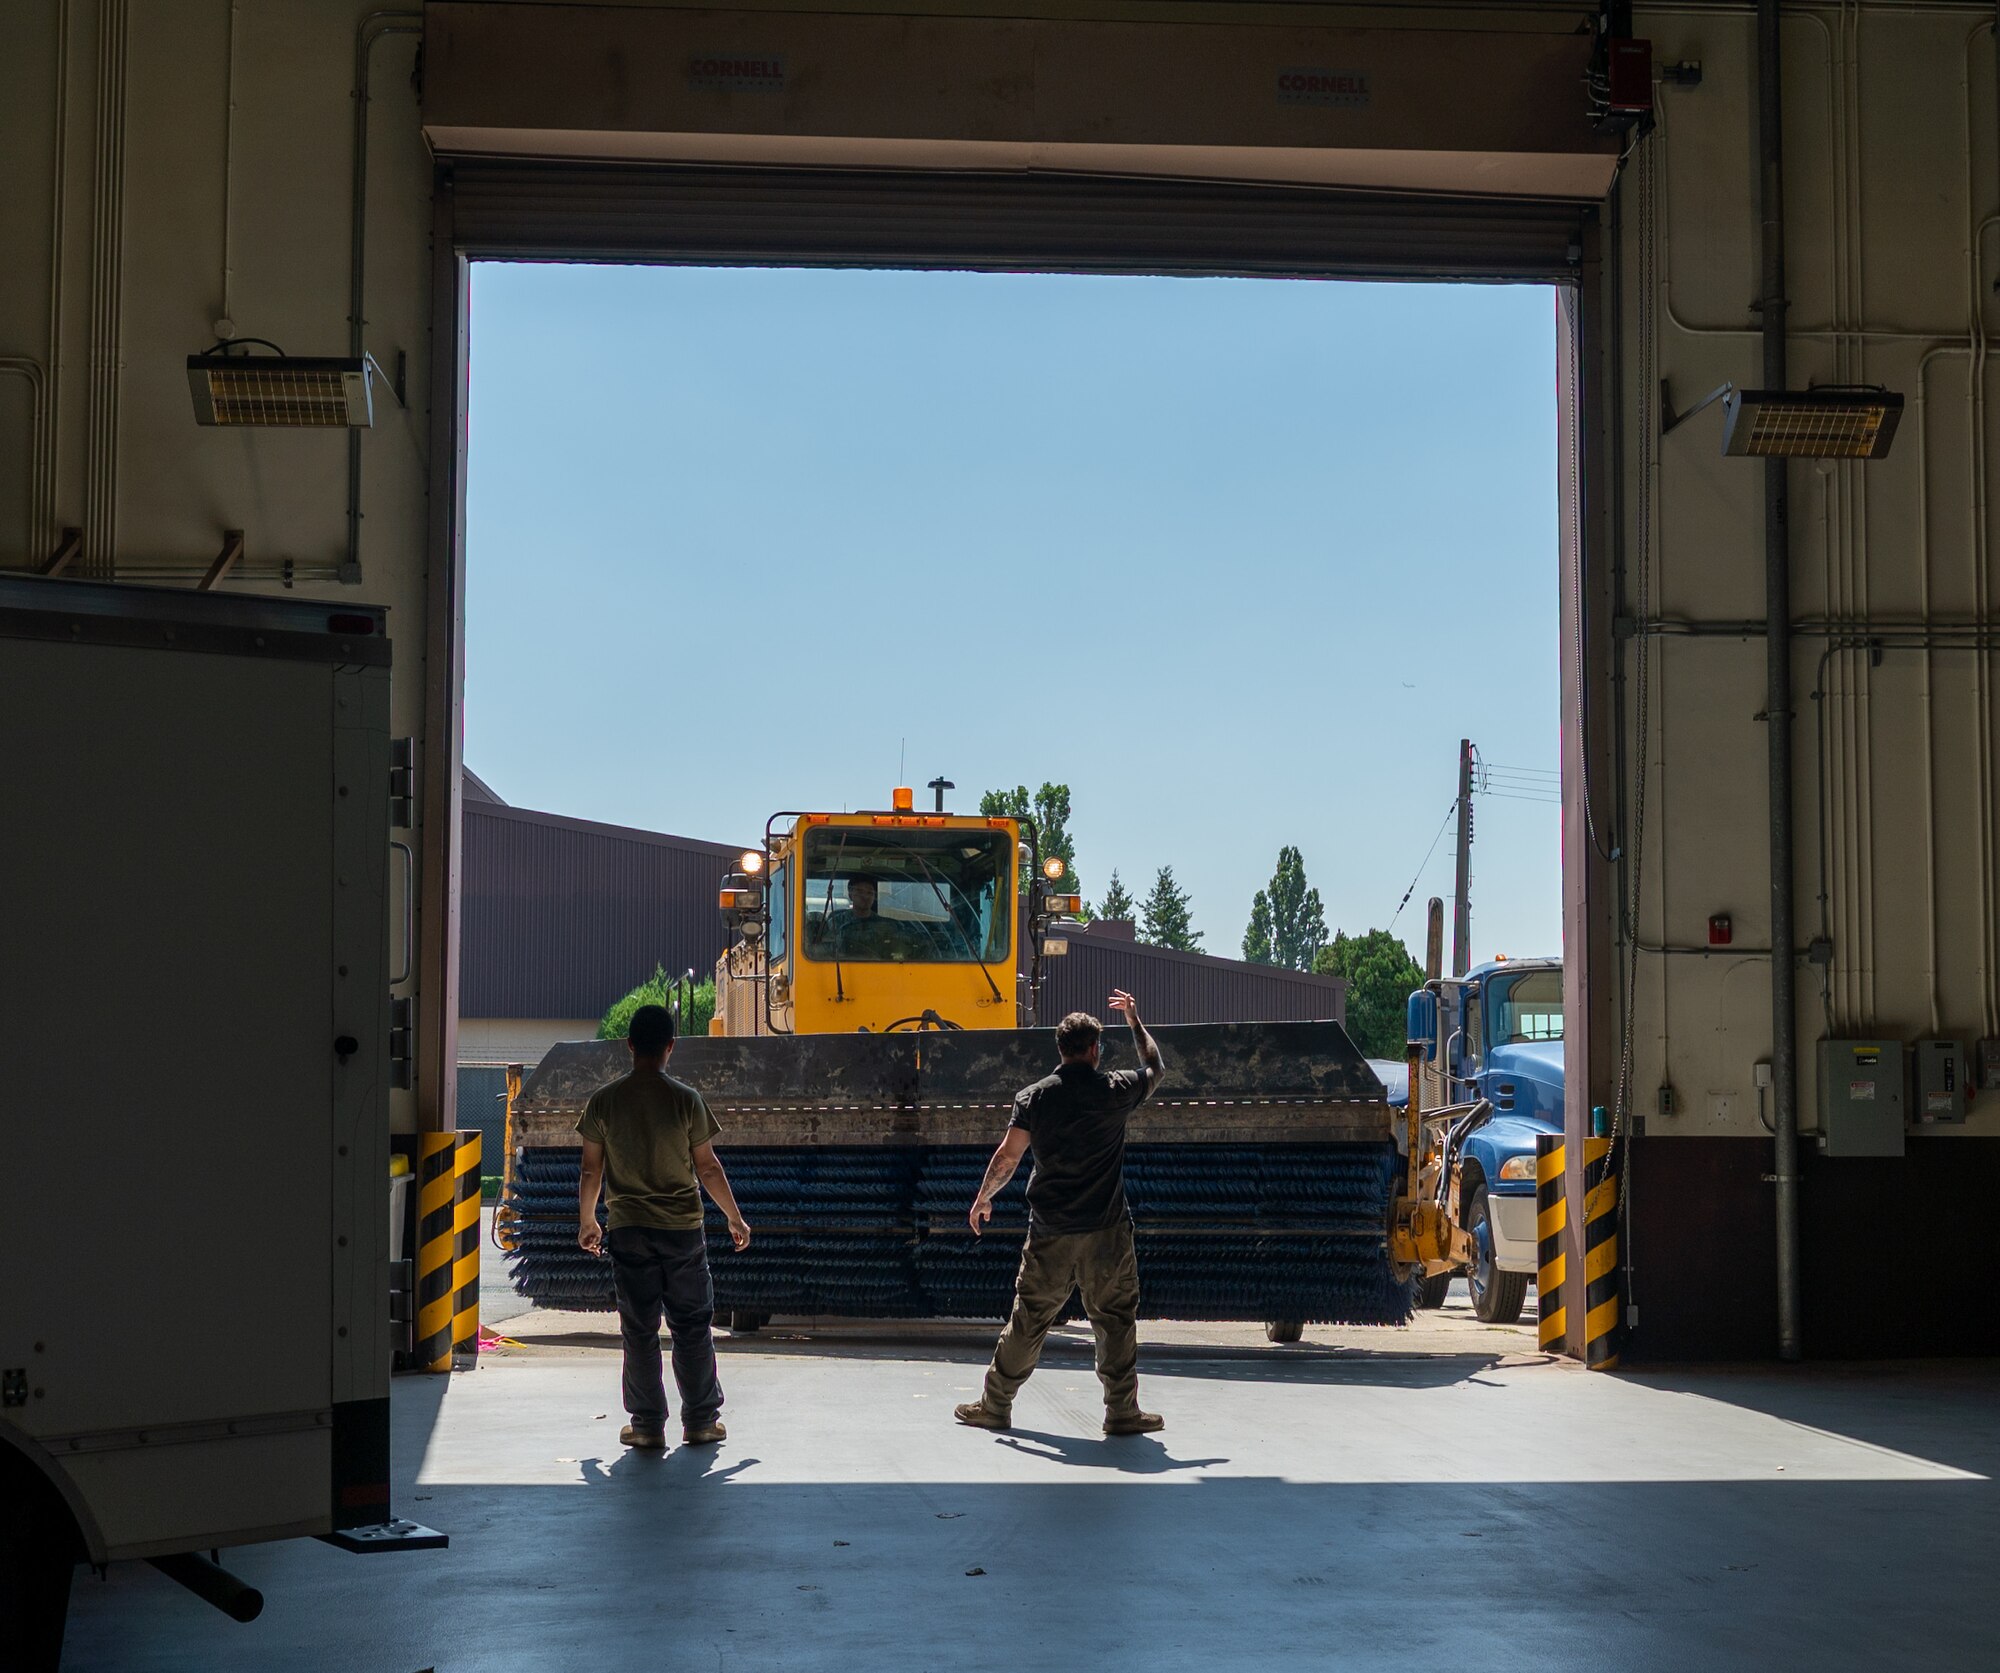 U.S. Air Force members from the 51st Logistics Readiness Squadron vehicle maintenance section, usher in a snow broom at Osan Air Base, Republic of Korea, Sept. 8, 2023. Winter service vehicles undergo preventative maintenance during the summer rebuild phase to ensure mission readiness in snowy weather. Assets, like heavy equipment, are included in the vehicle validation process to determine asset retainability for unit mission readiness. (U.S. Air Force photo by Staff Sgt. Kelsea Caballero)